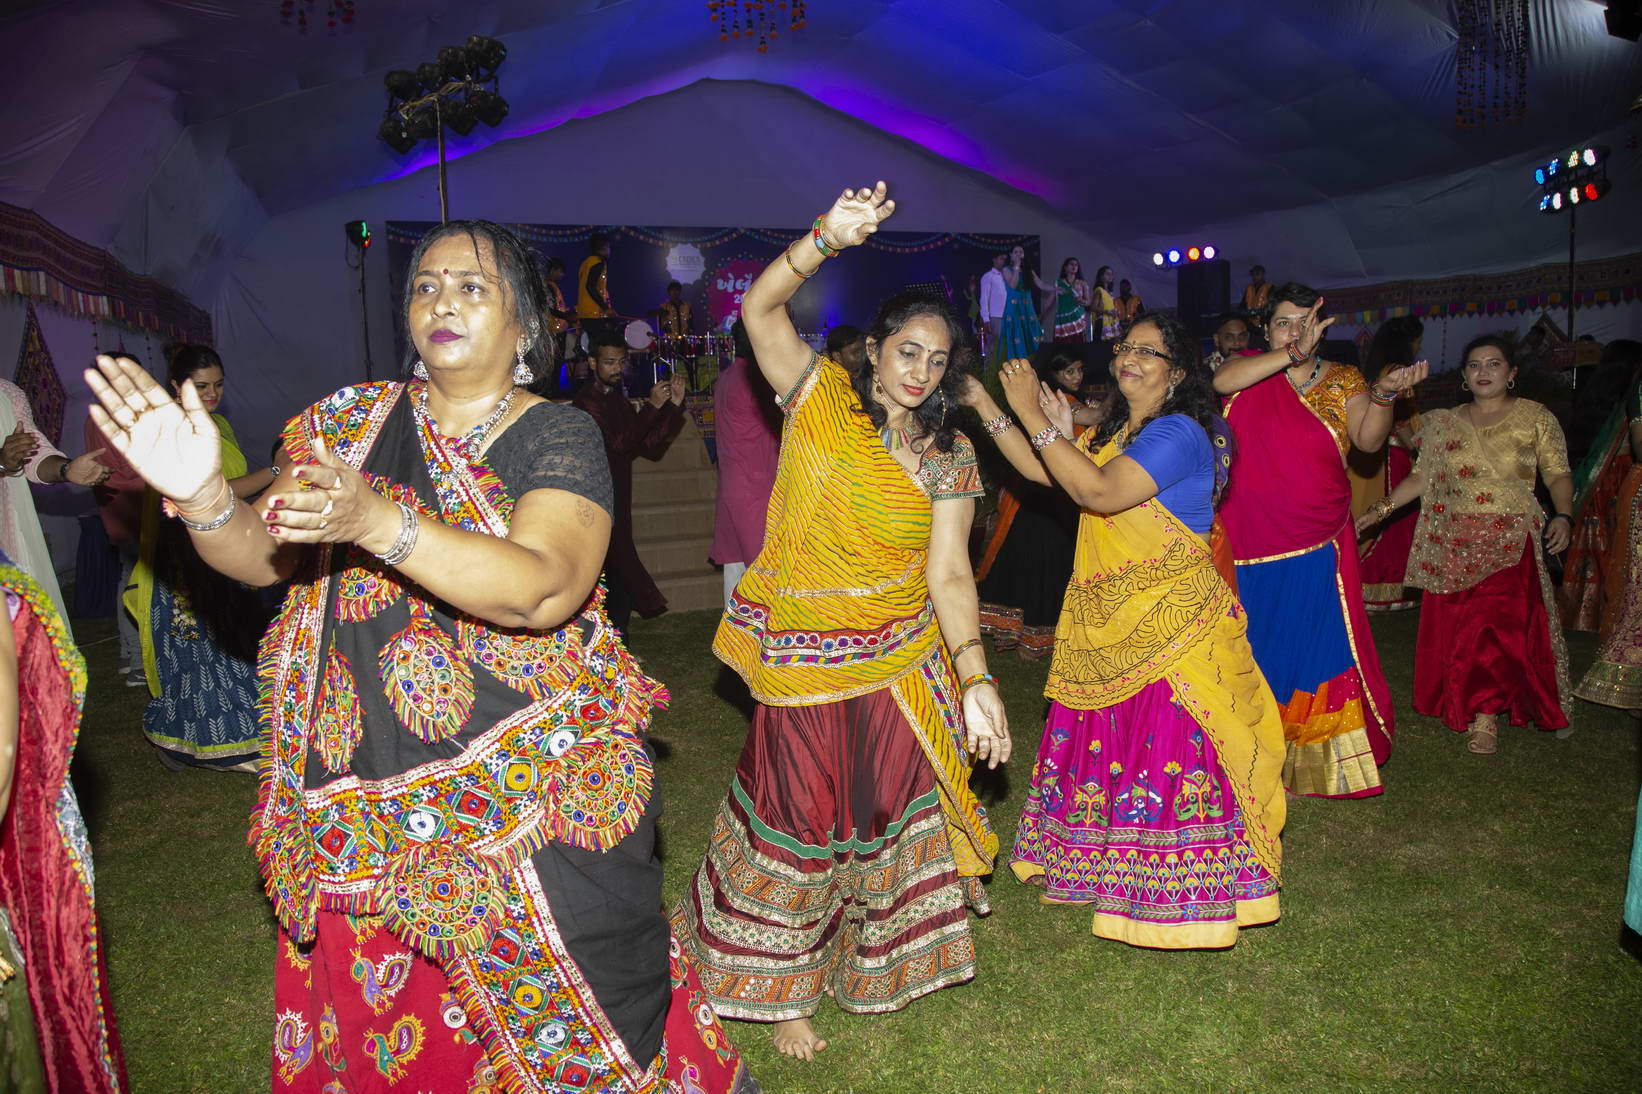  Navratri celebration with messages of social goodness     